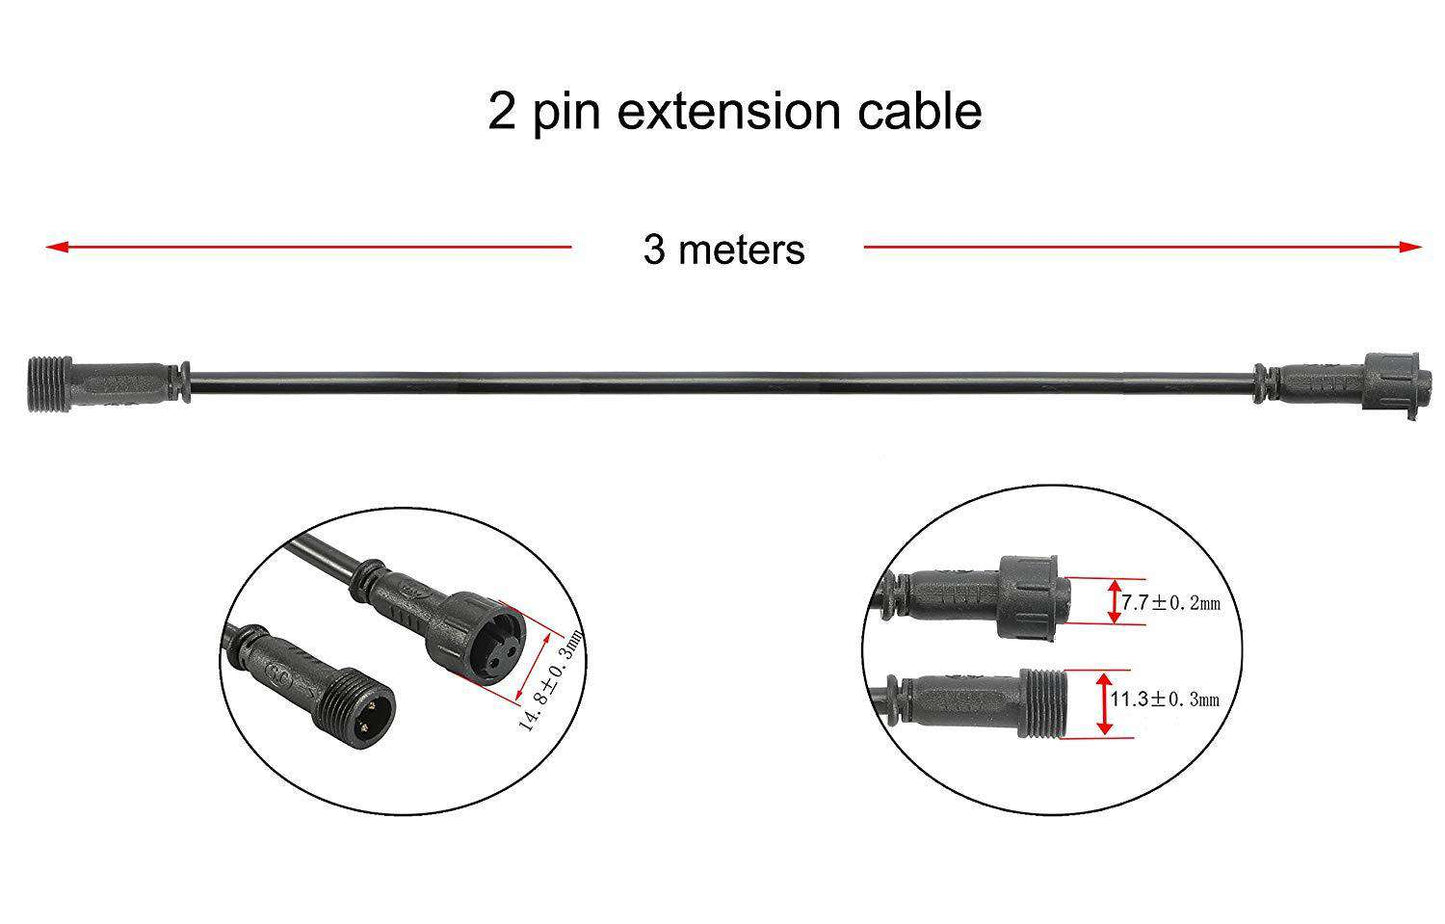 FVTLED 1m 3.28ft 2Pin Extension Cable Wire with Male and Female Connectors at Both Ends for Single Color LED Deck Light